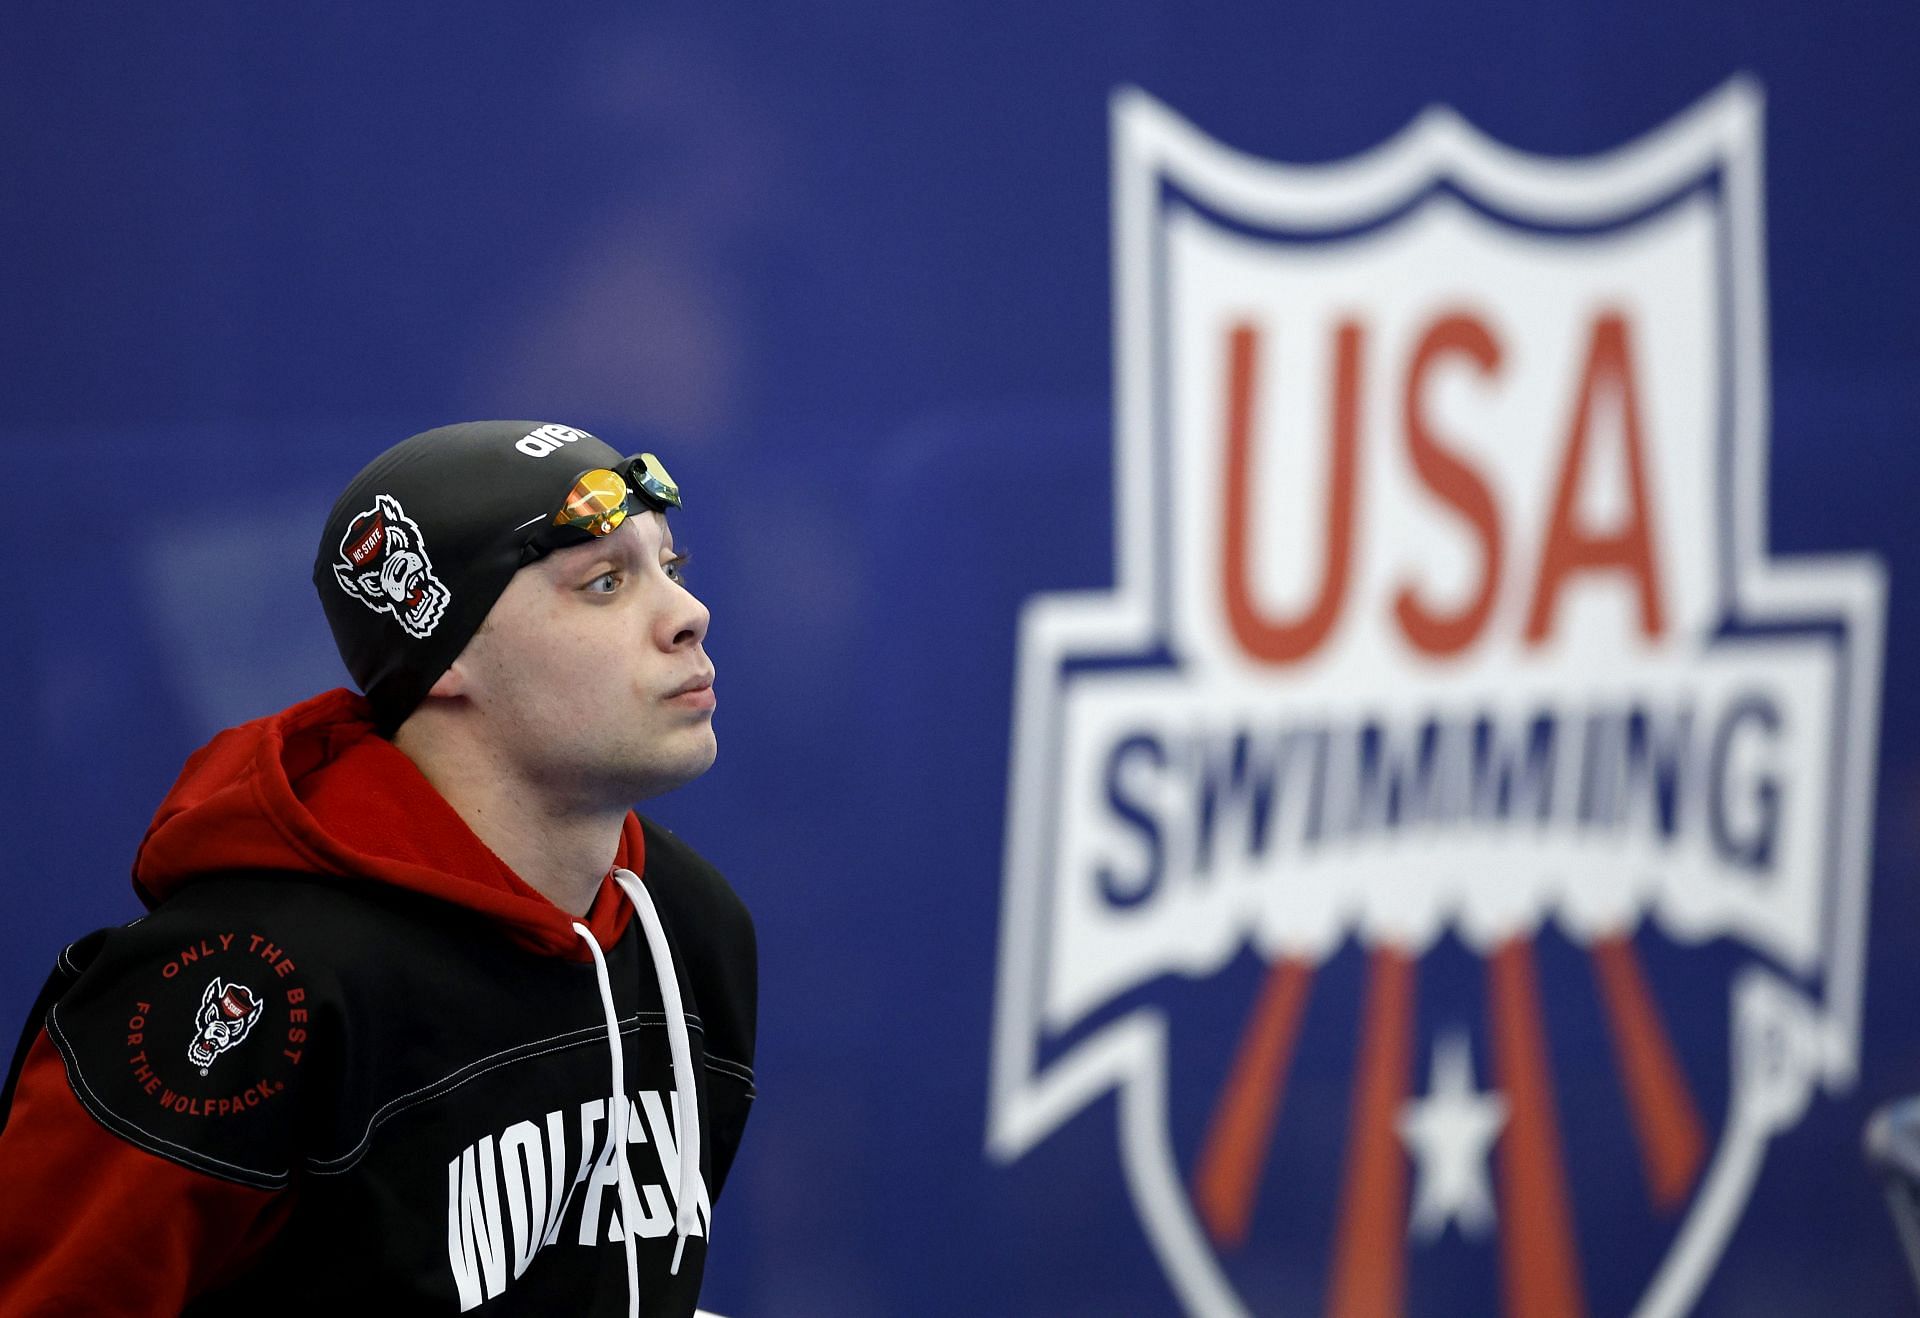 Will Gallant Looks on as he prepares for the 800m Freestyle Final at the Toyota U.S. Open (Image via Getty Images)